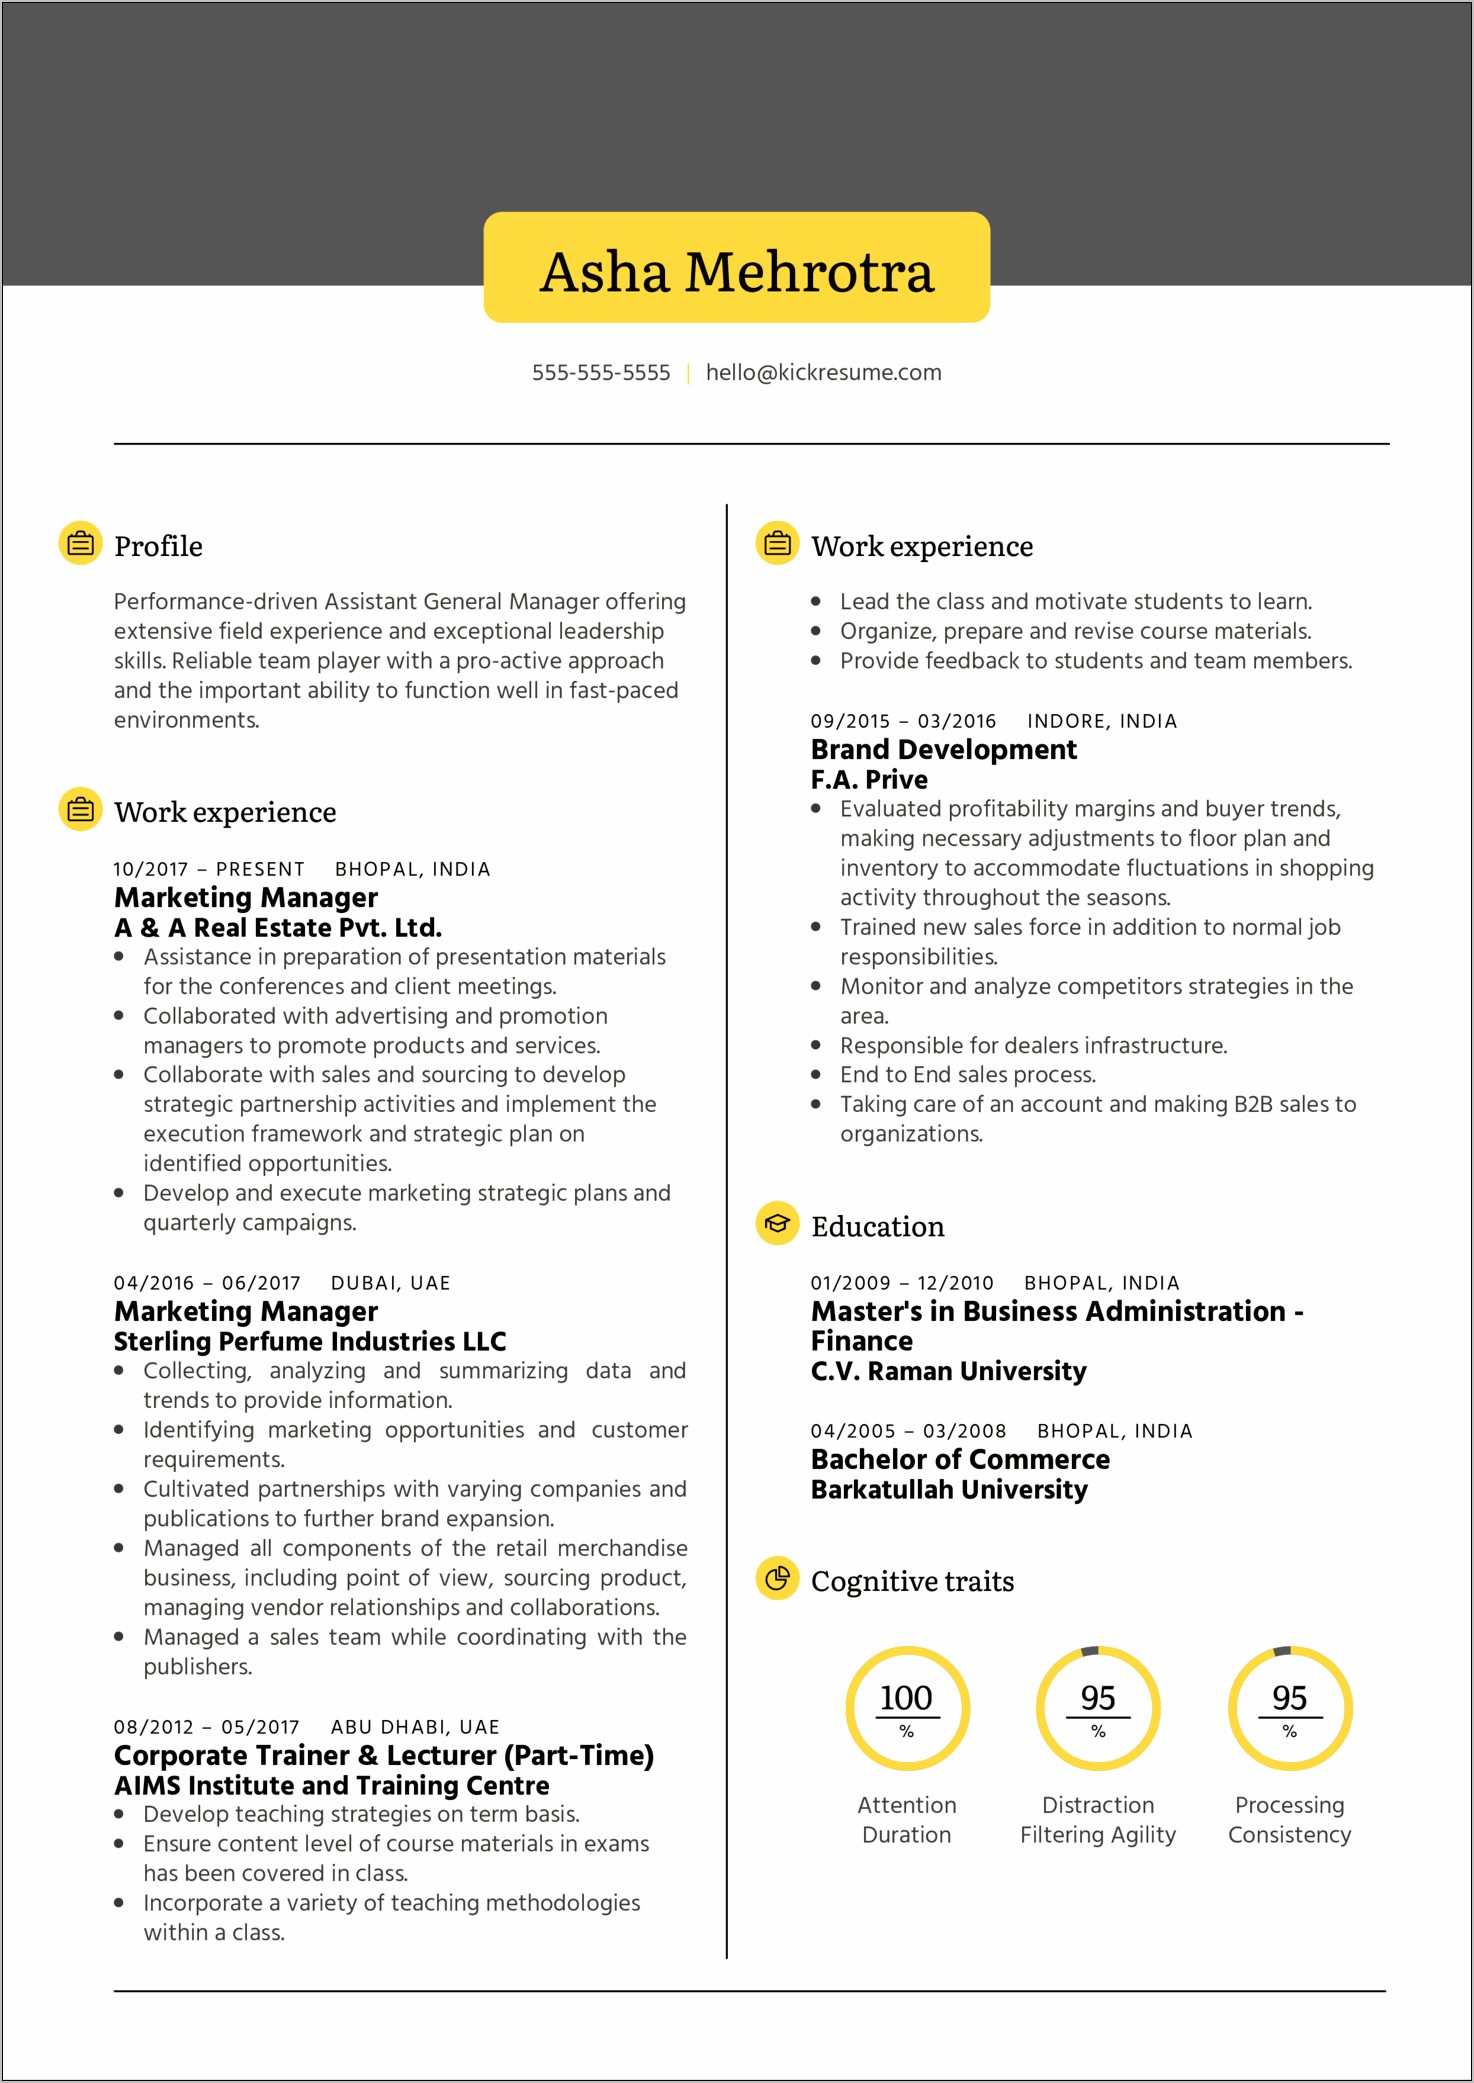 Executed On The Job Training Resume